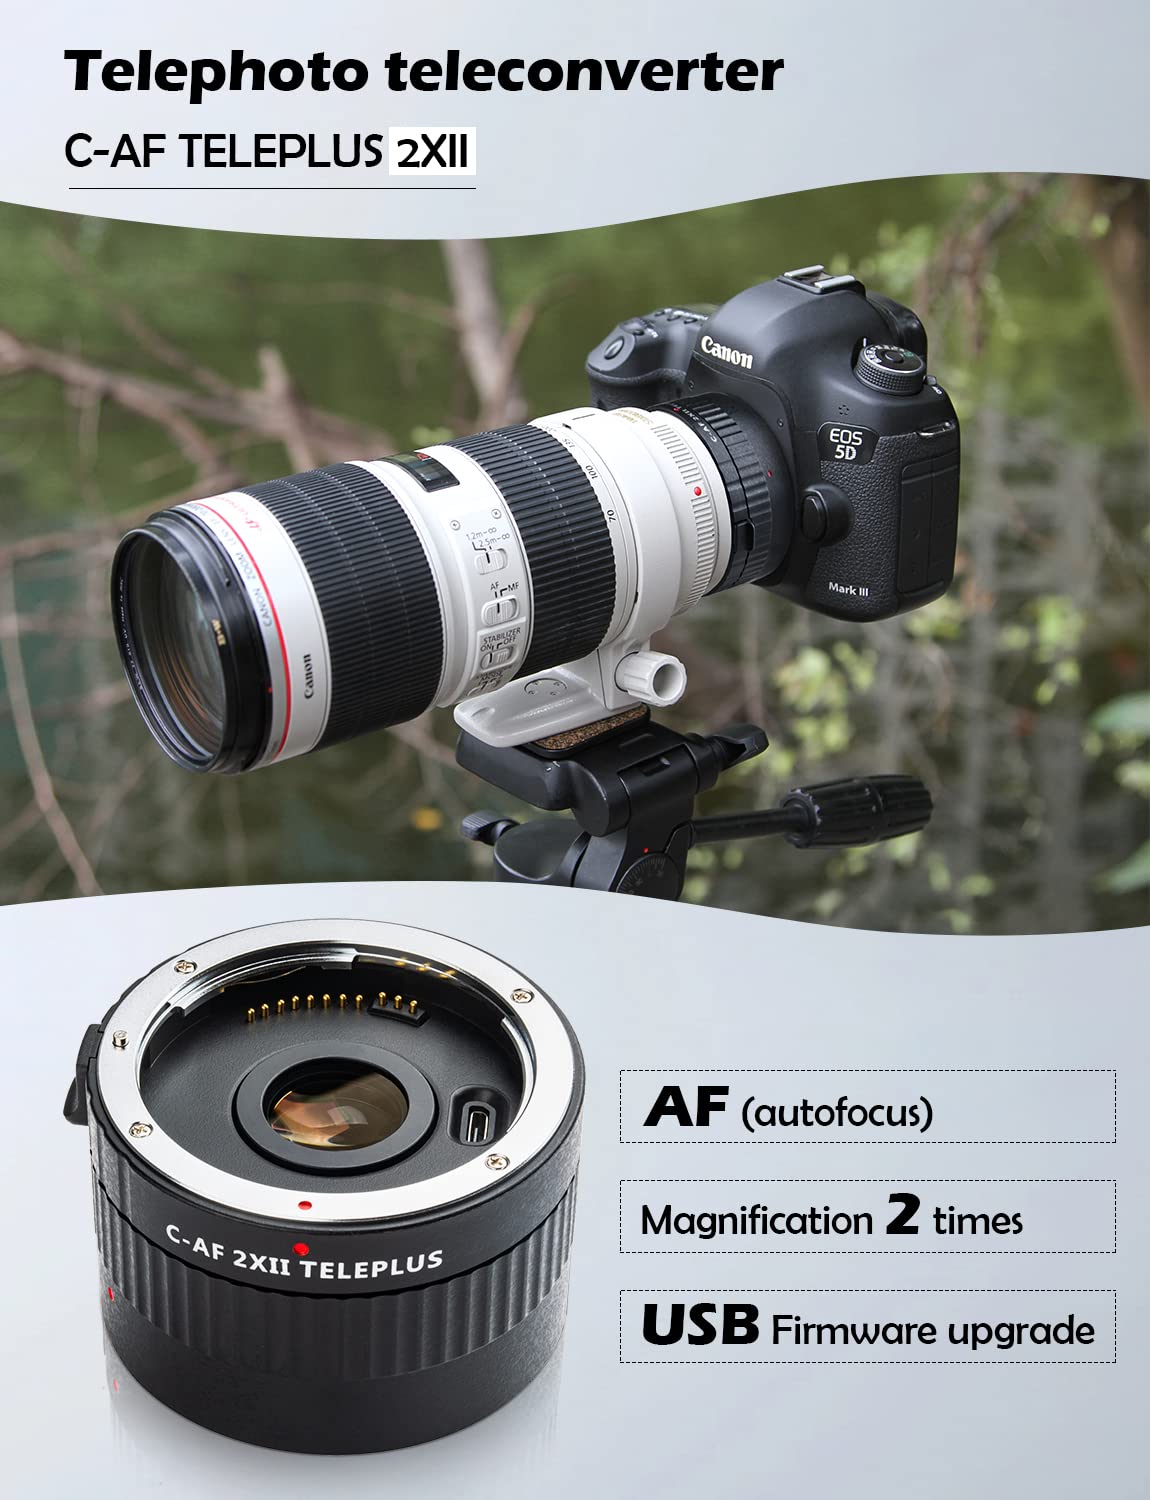 Auto Focus 2.0X Telephoto Lens for Canon, VILTROX TELEPLUS 2.0X Teleconverter Auto Focus Telephoto Extender Lens Converter for Canon EF Mount Telephoto Lens 70-200mm 100-400mm and DSLR Camera 80D 5DII